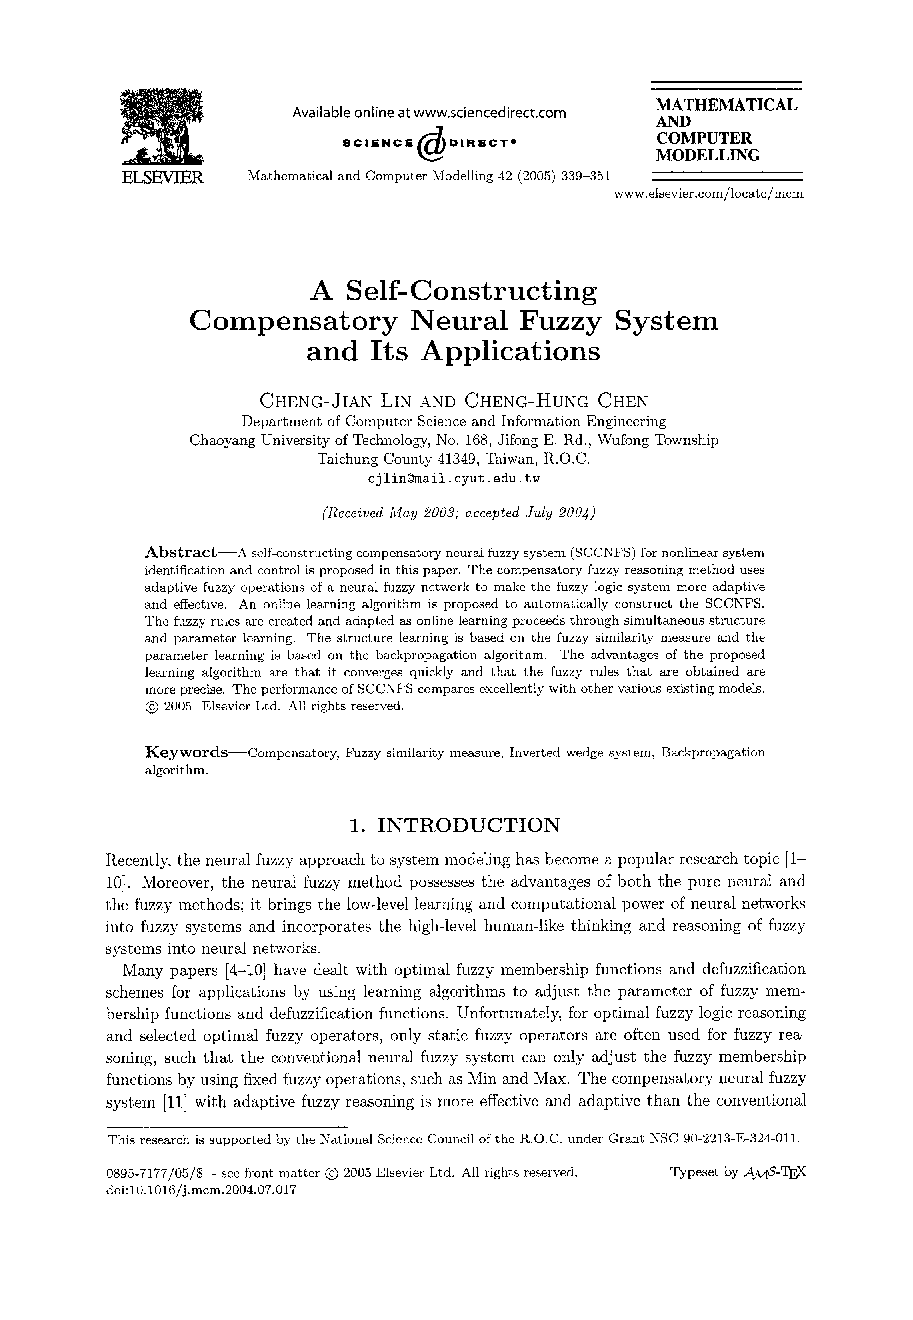 A self-constructing compensatory neural fuzzy system and its applications